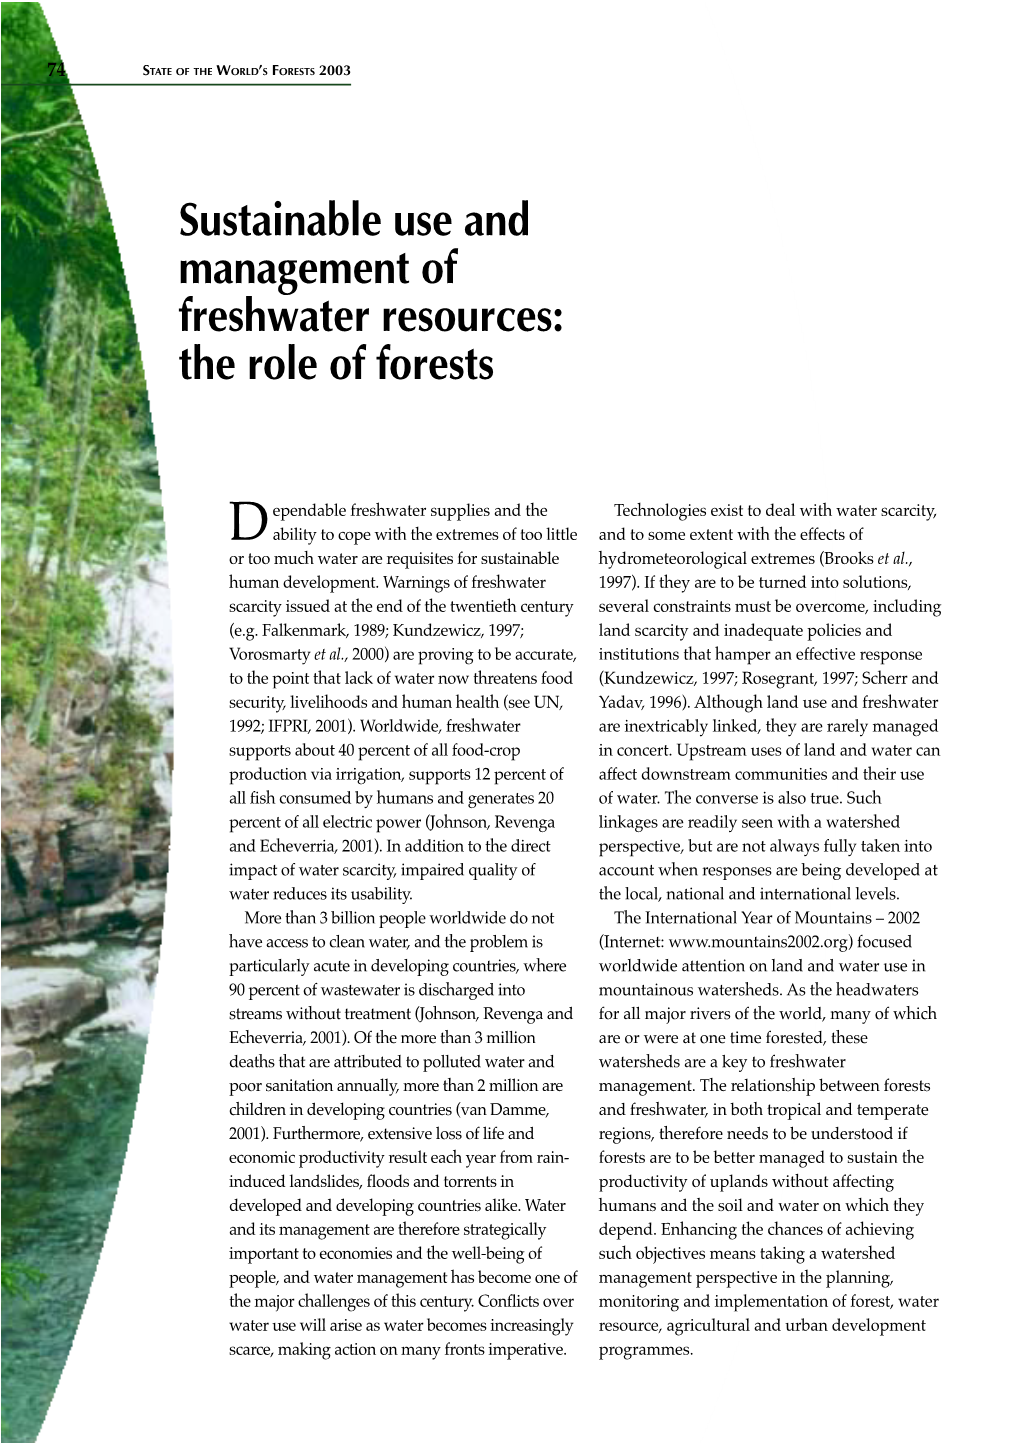 Sustainable Use and Management of Freshwater Resources: the Role of Forests